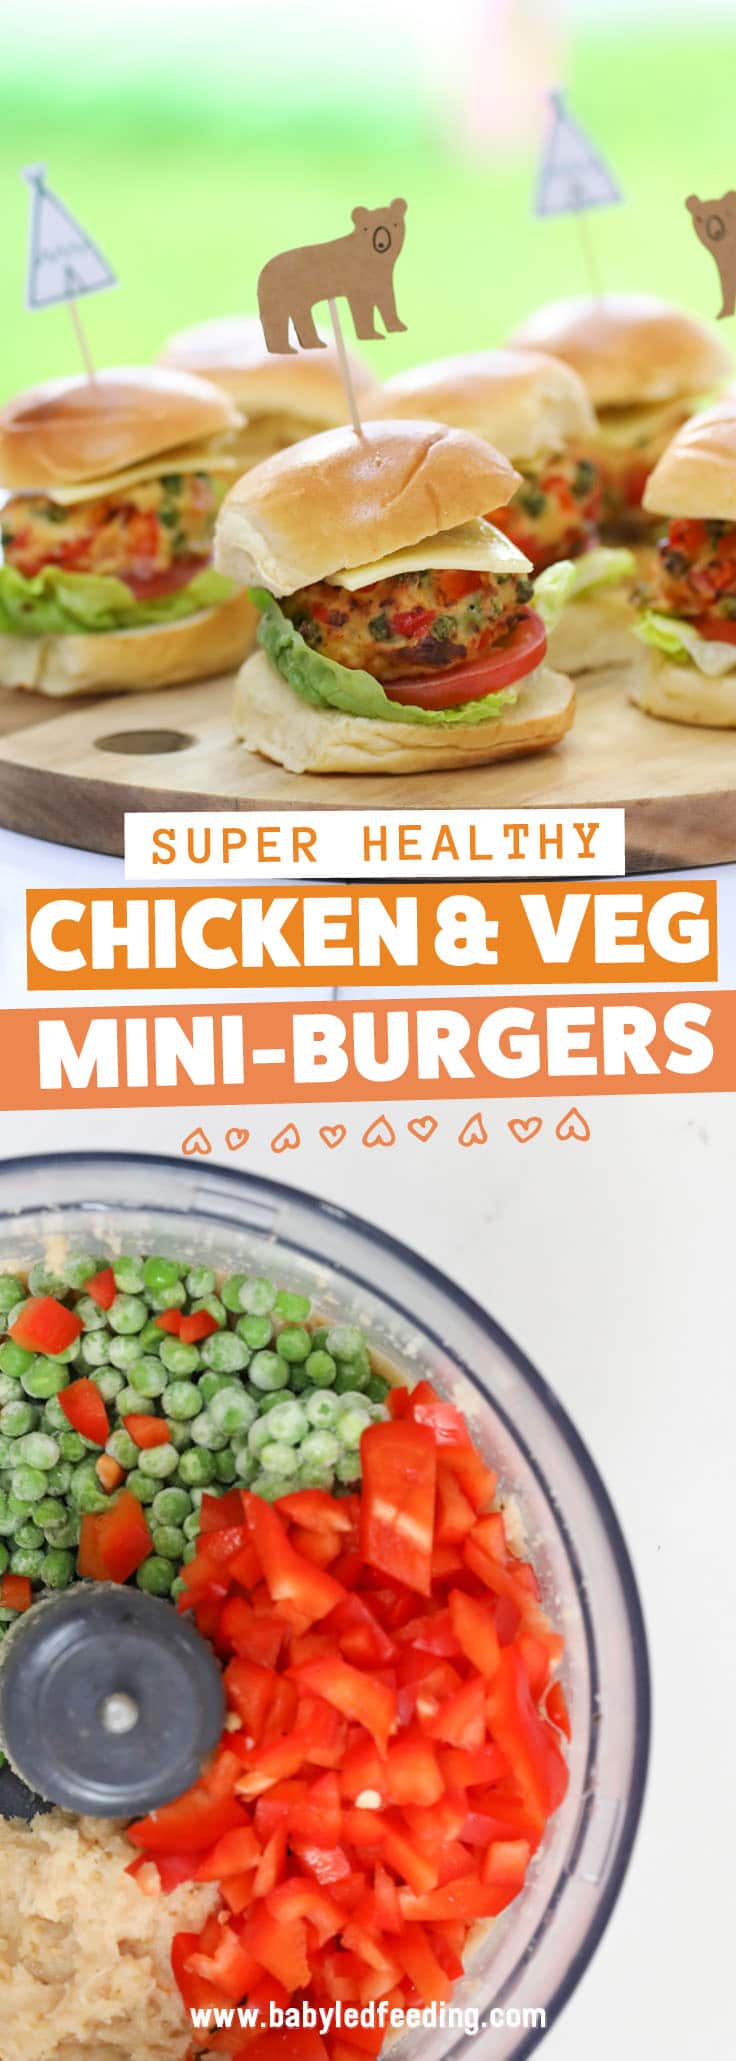 Baby Friendly Mini Chicken & Veggie Burgers are packed with nutritious veggies like peas and bell peppers. This healthy finger food dinner is an easy recipe that you can feed the entire family. You can also make ahead and freeze the patties for a quick healthy baby led feeding lunch or dinner later! #chickenburgers #babyledweaning #babyledfeeding #pickyeater #healthyrecipe